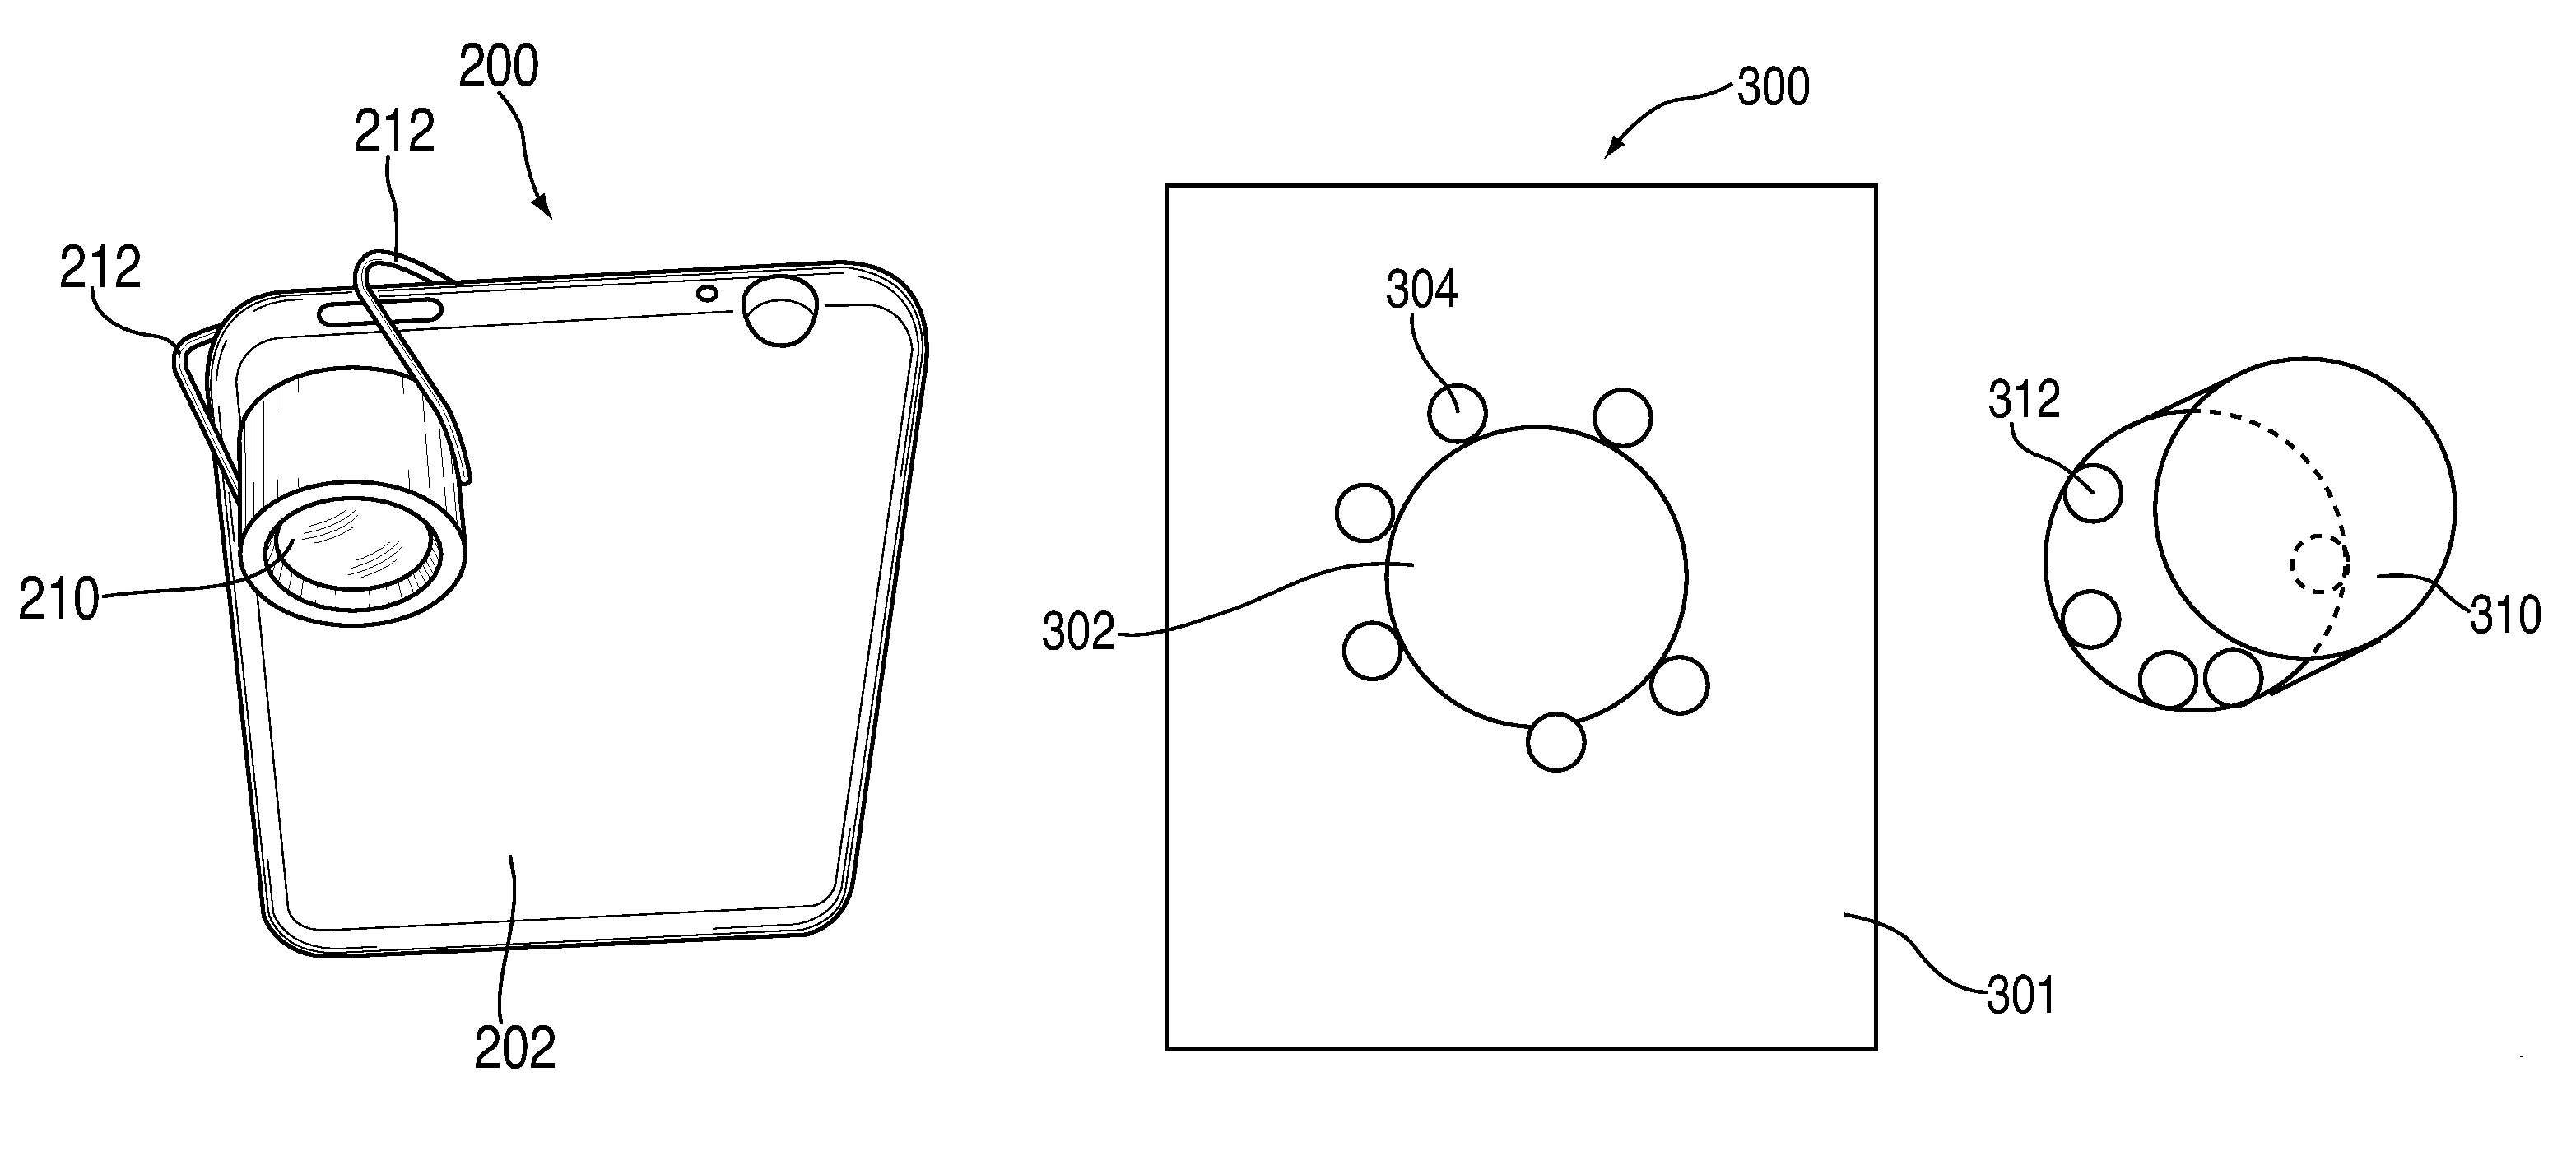 Magnet array for coupling and aligning an accessory to an electronic device